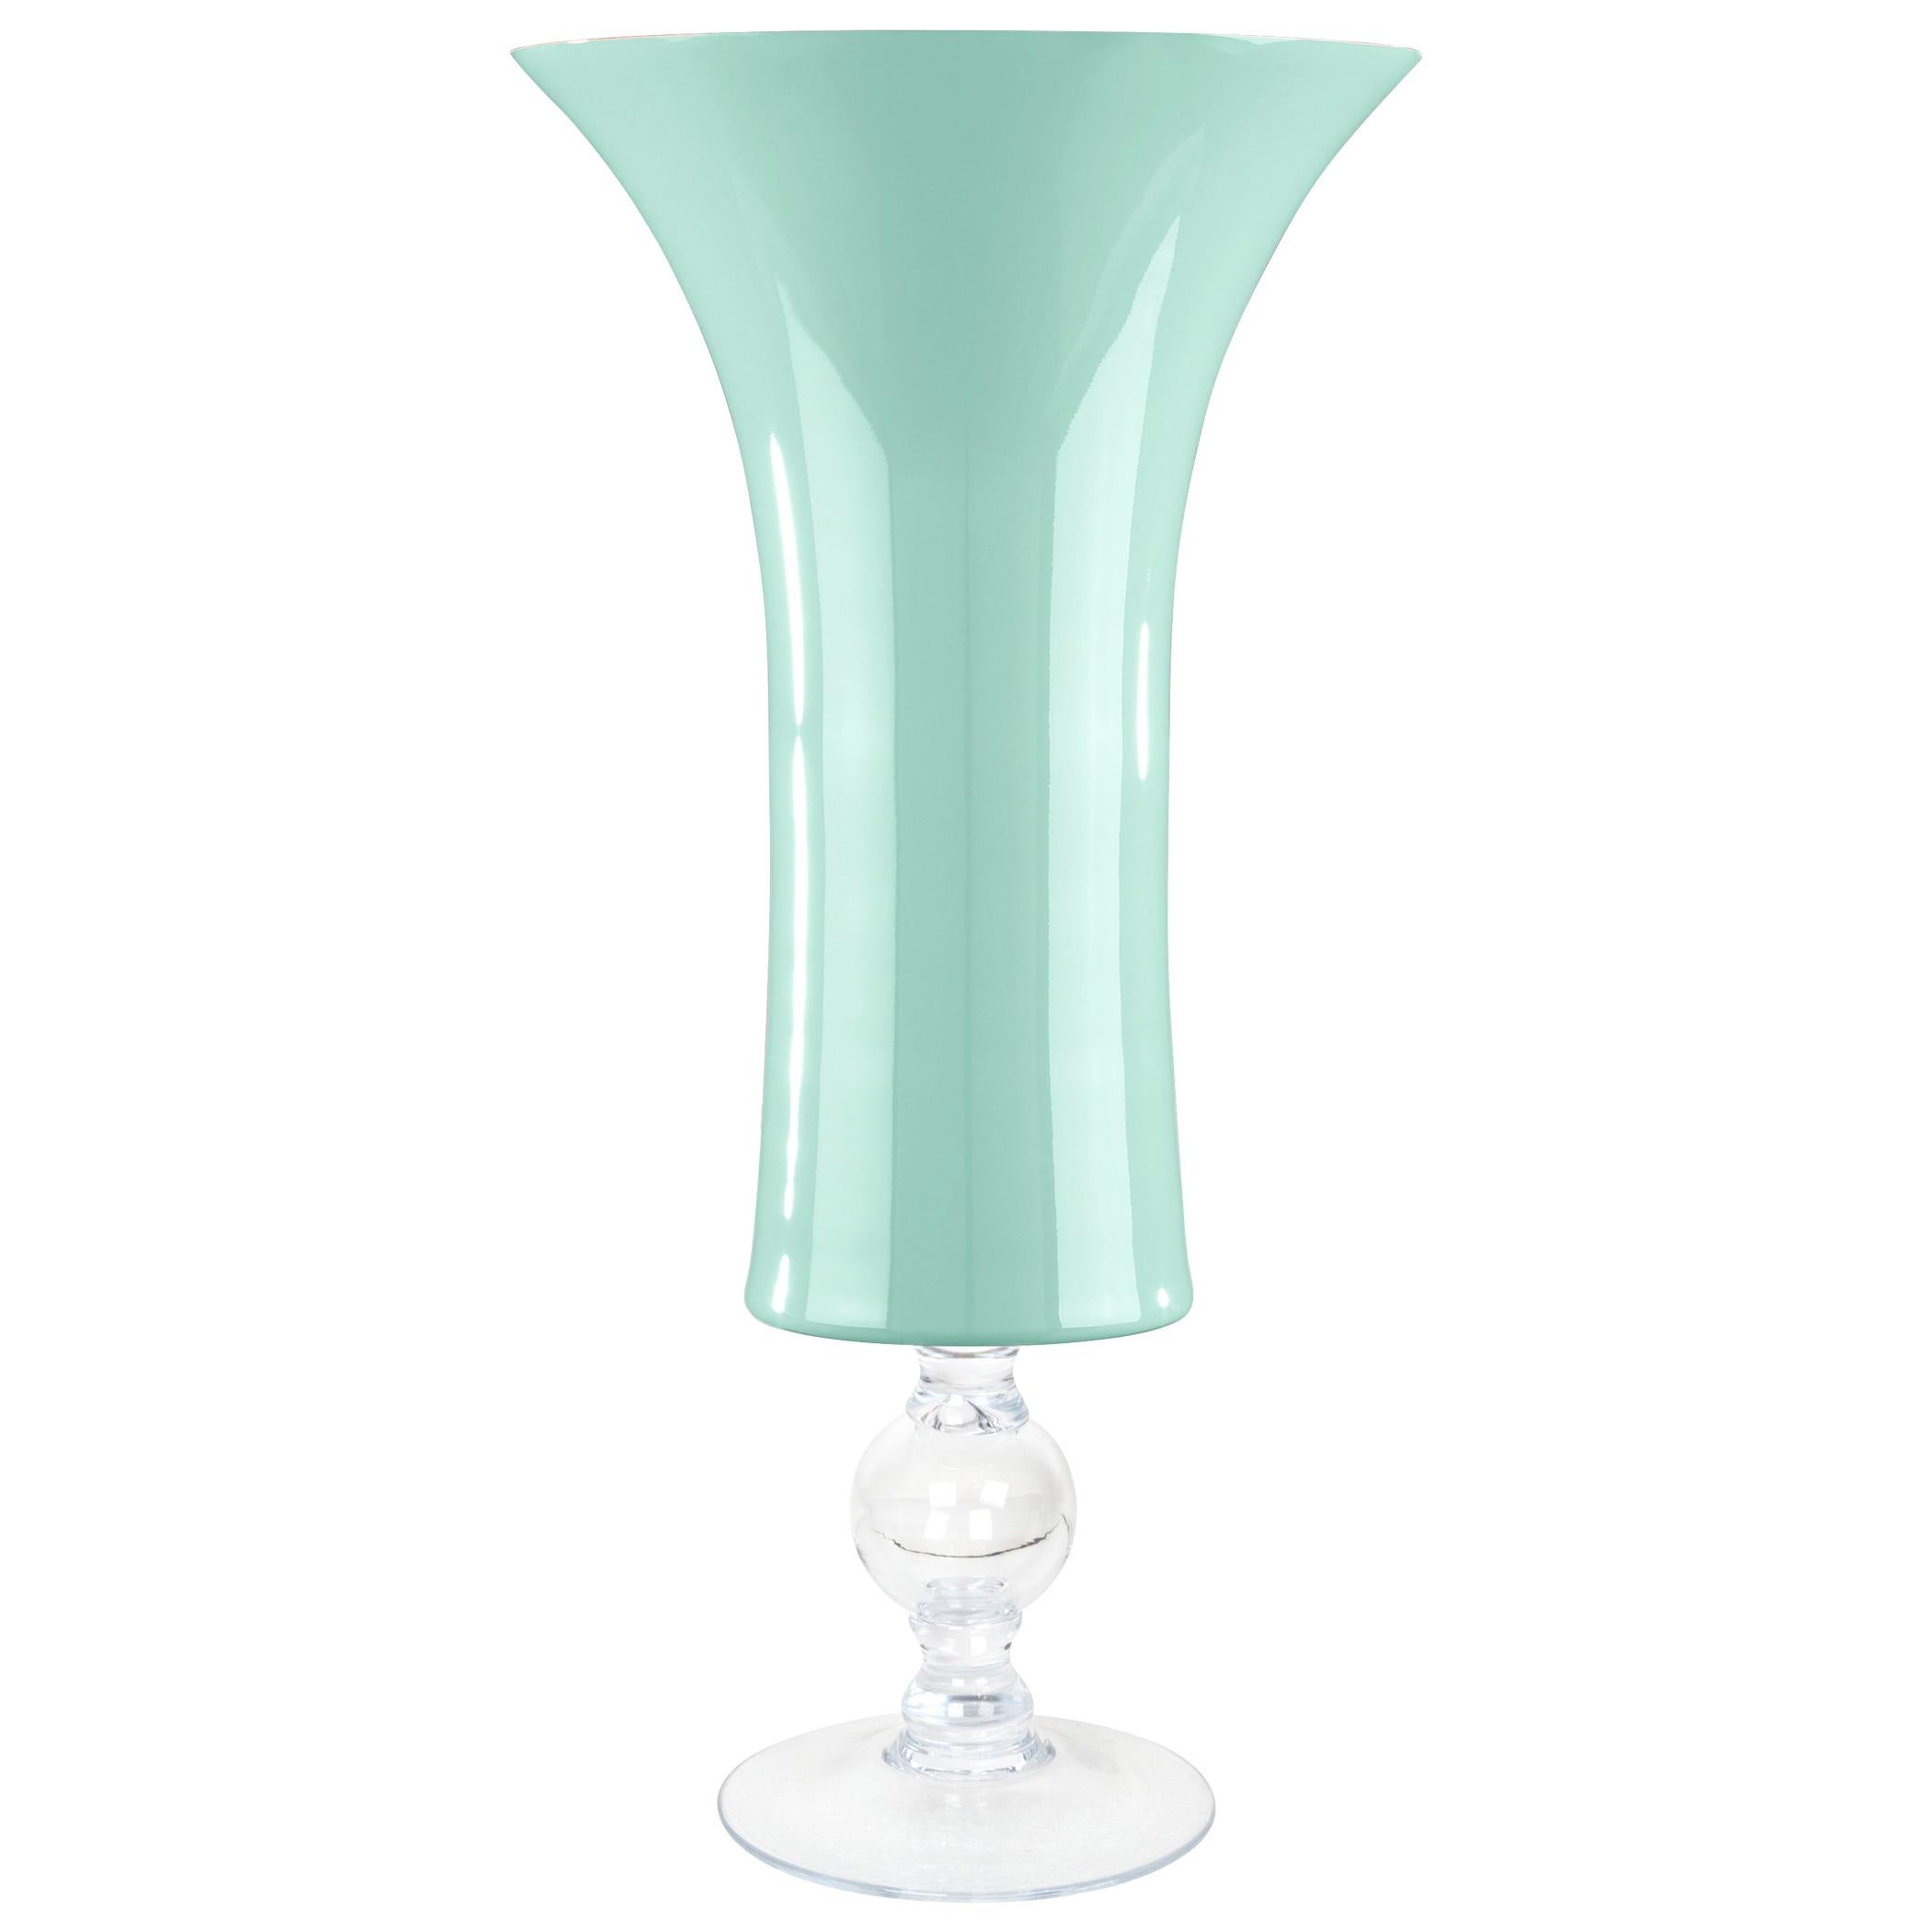 Bowl Laura Big, Neo Mint Color, 2020 Trend, in Glass, Italy For Sale